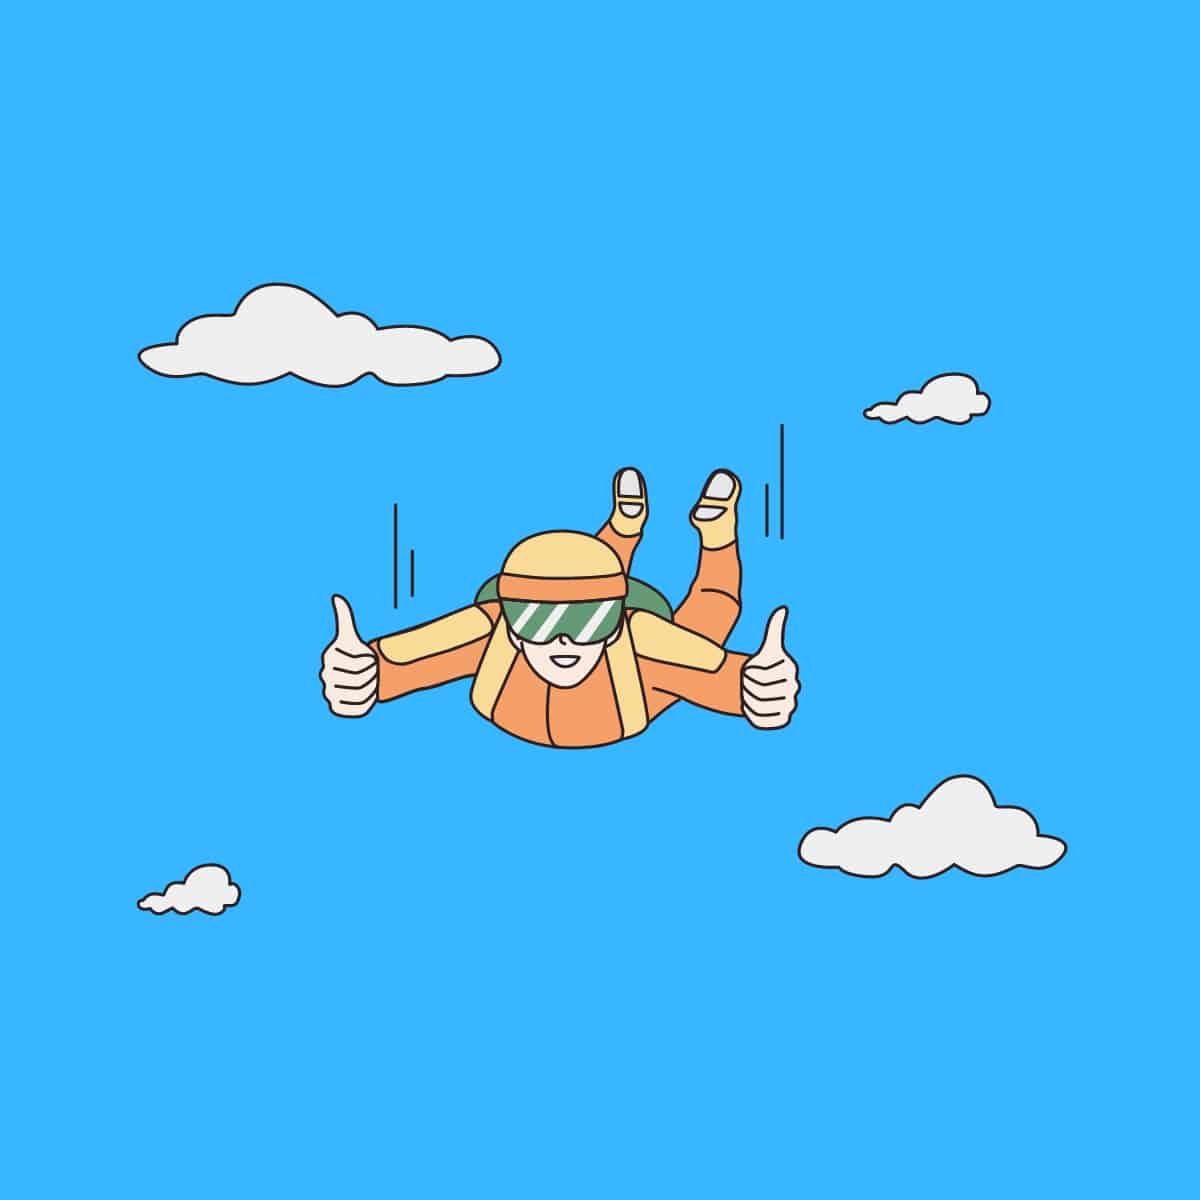 Cartoon graphic of a skydiver falling in the sky wit clouds on a blue background.